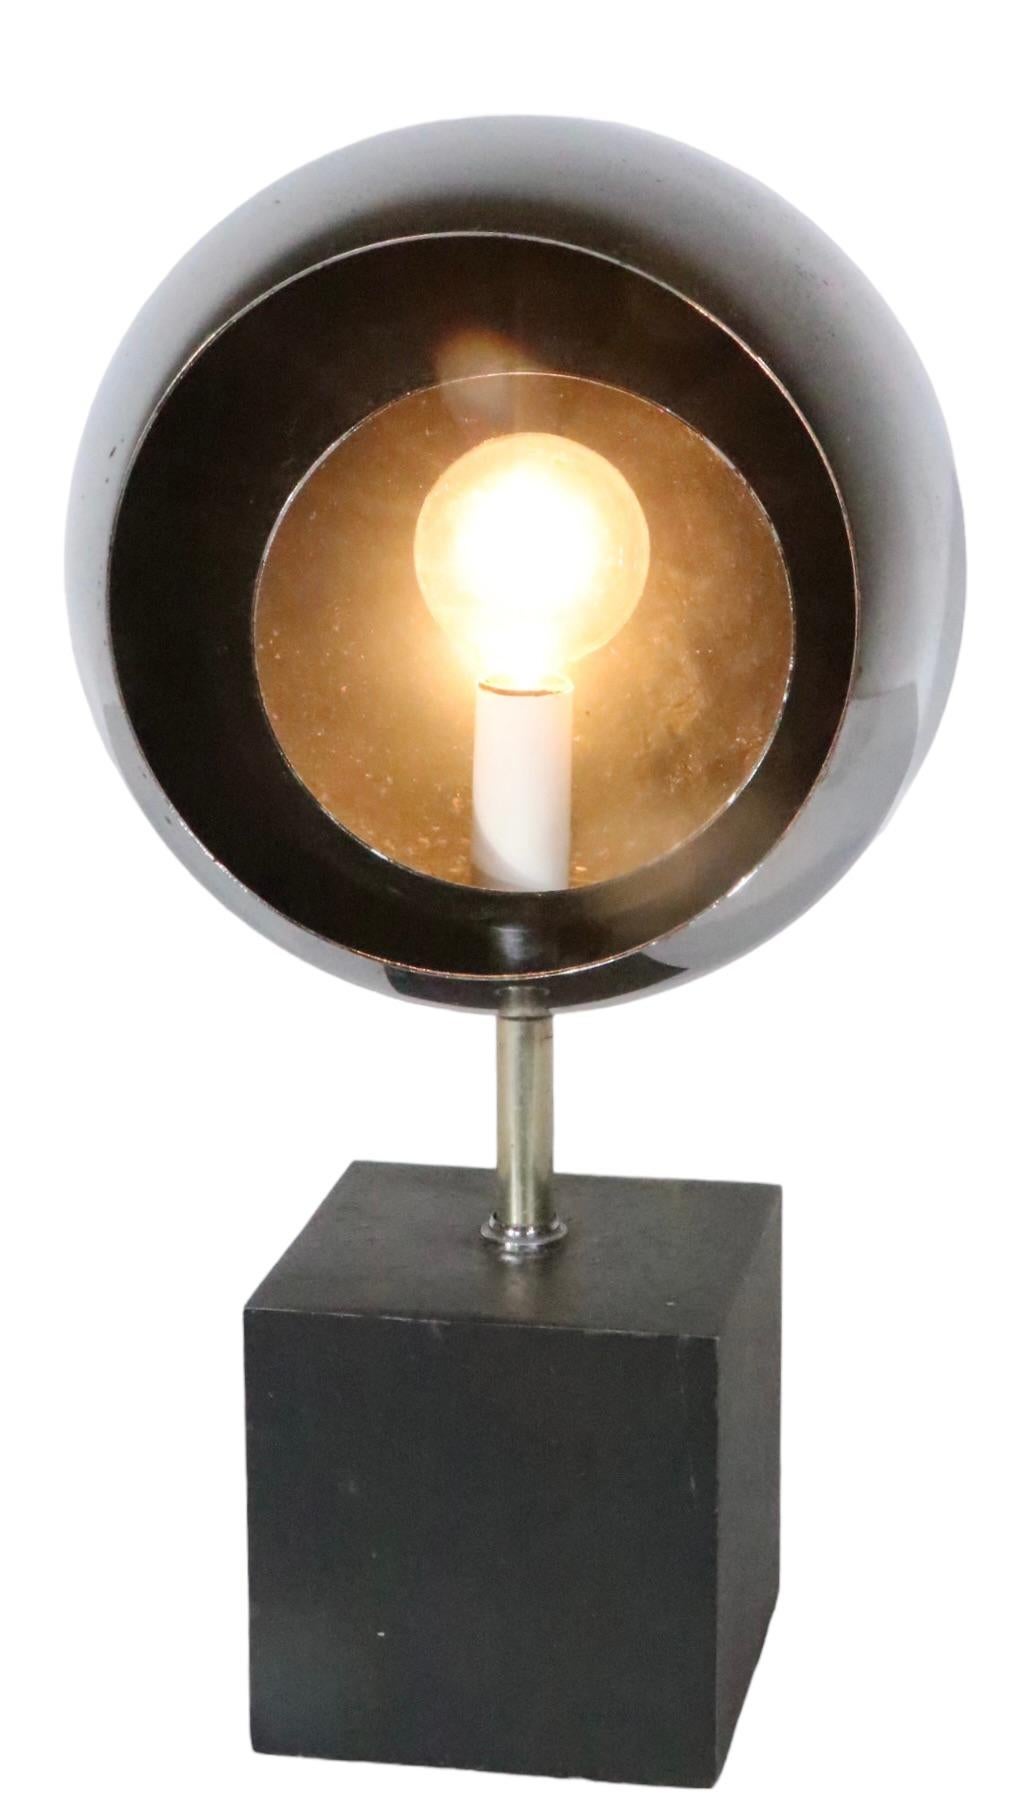 This interesting desk, or table lamp, features a black block form base that supports a chrome ball shade which has a smaller chrome ball inside it, that rotates to control the light. The lamps in original and working condition, it does show  wear to